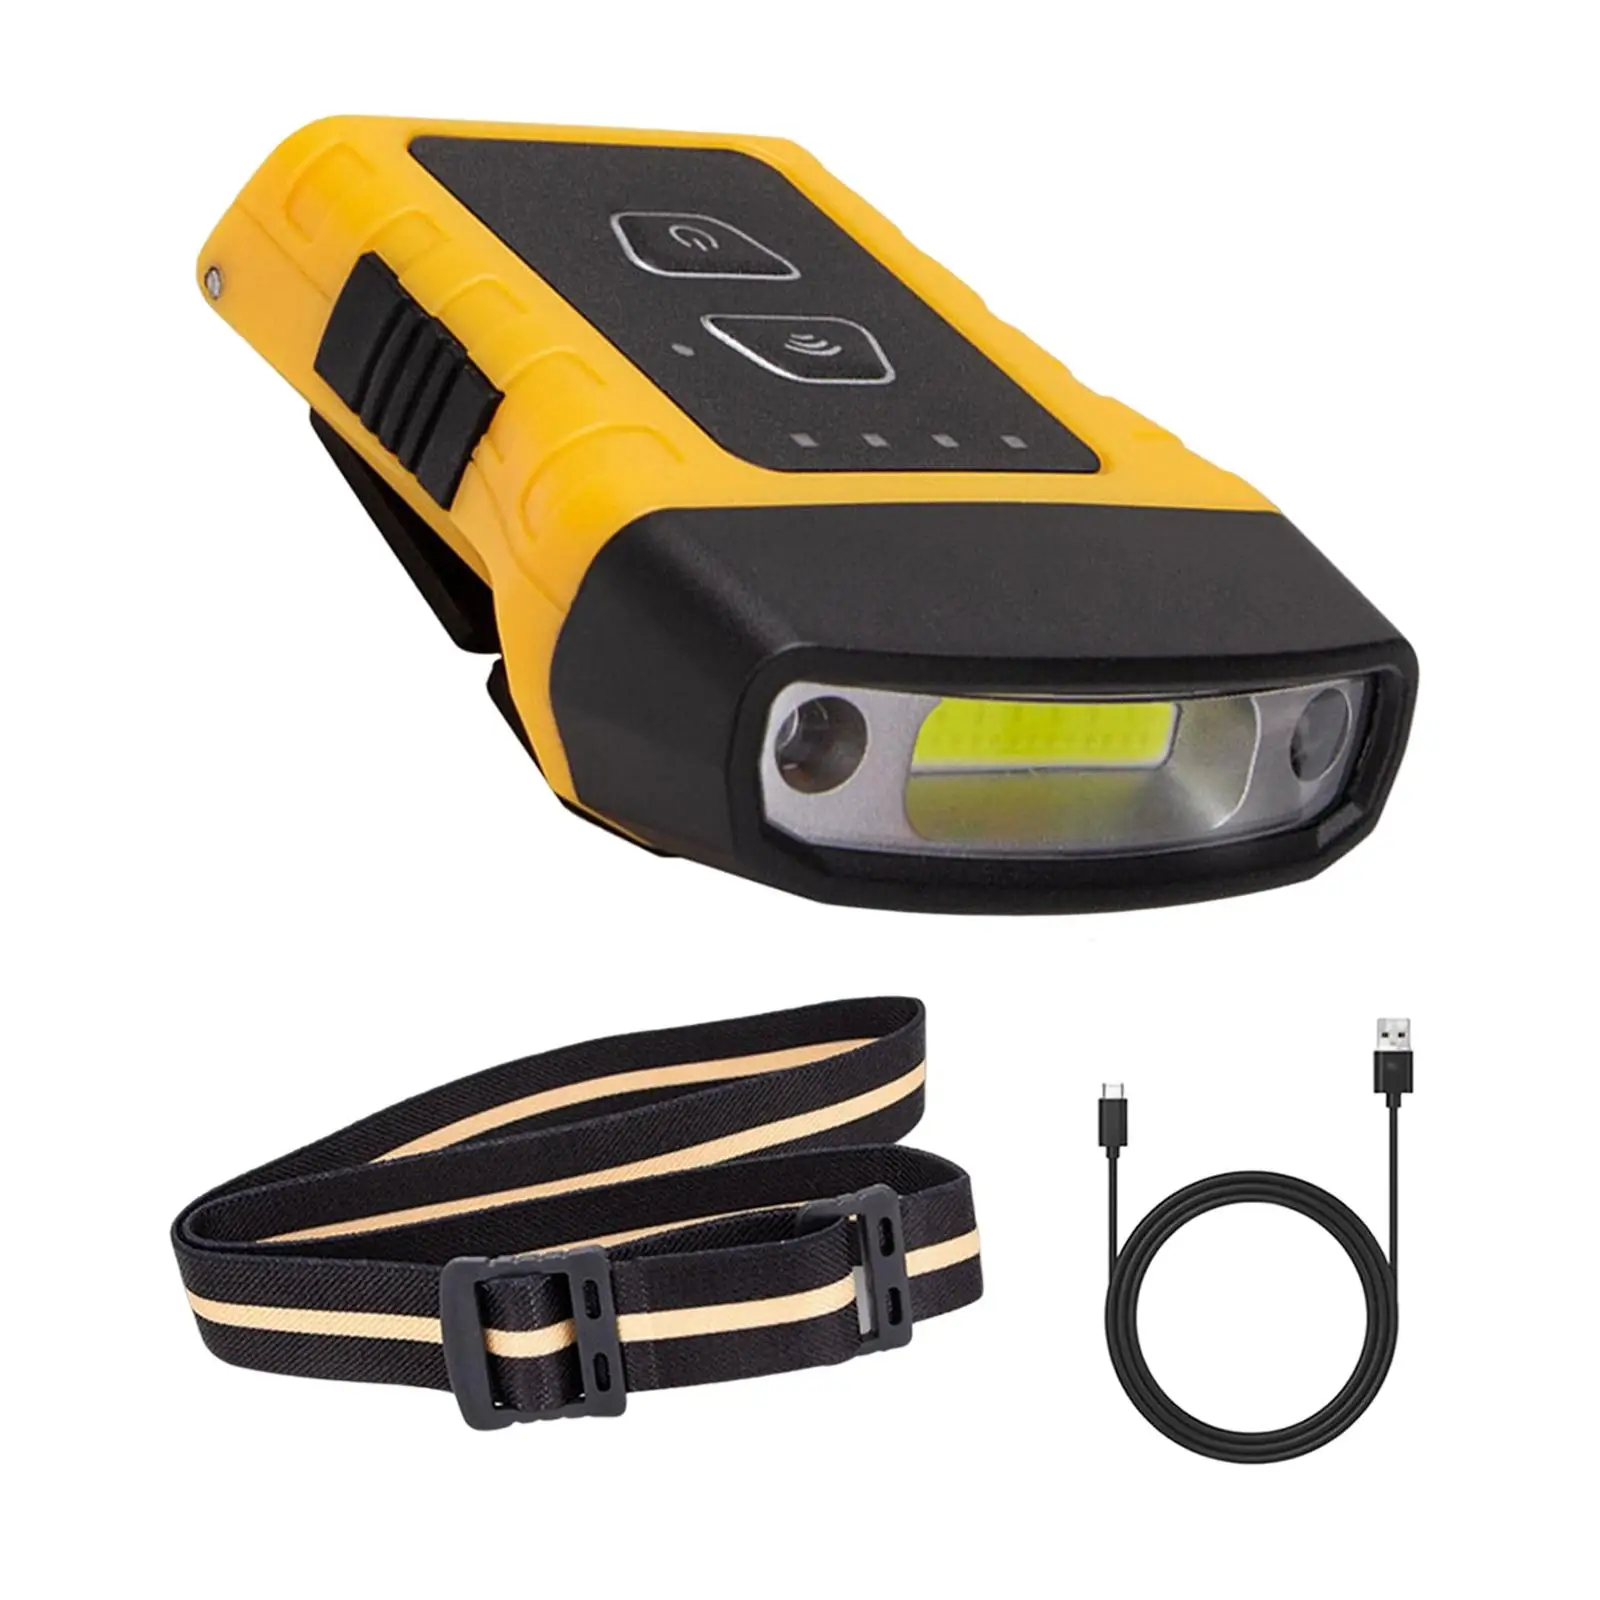 2 in 1 COB Headlamp LED Headlight Flashlight Rechargeable 180 Adjustable Sensor Light Torch for Hiking Outdoor